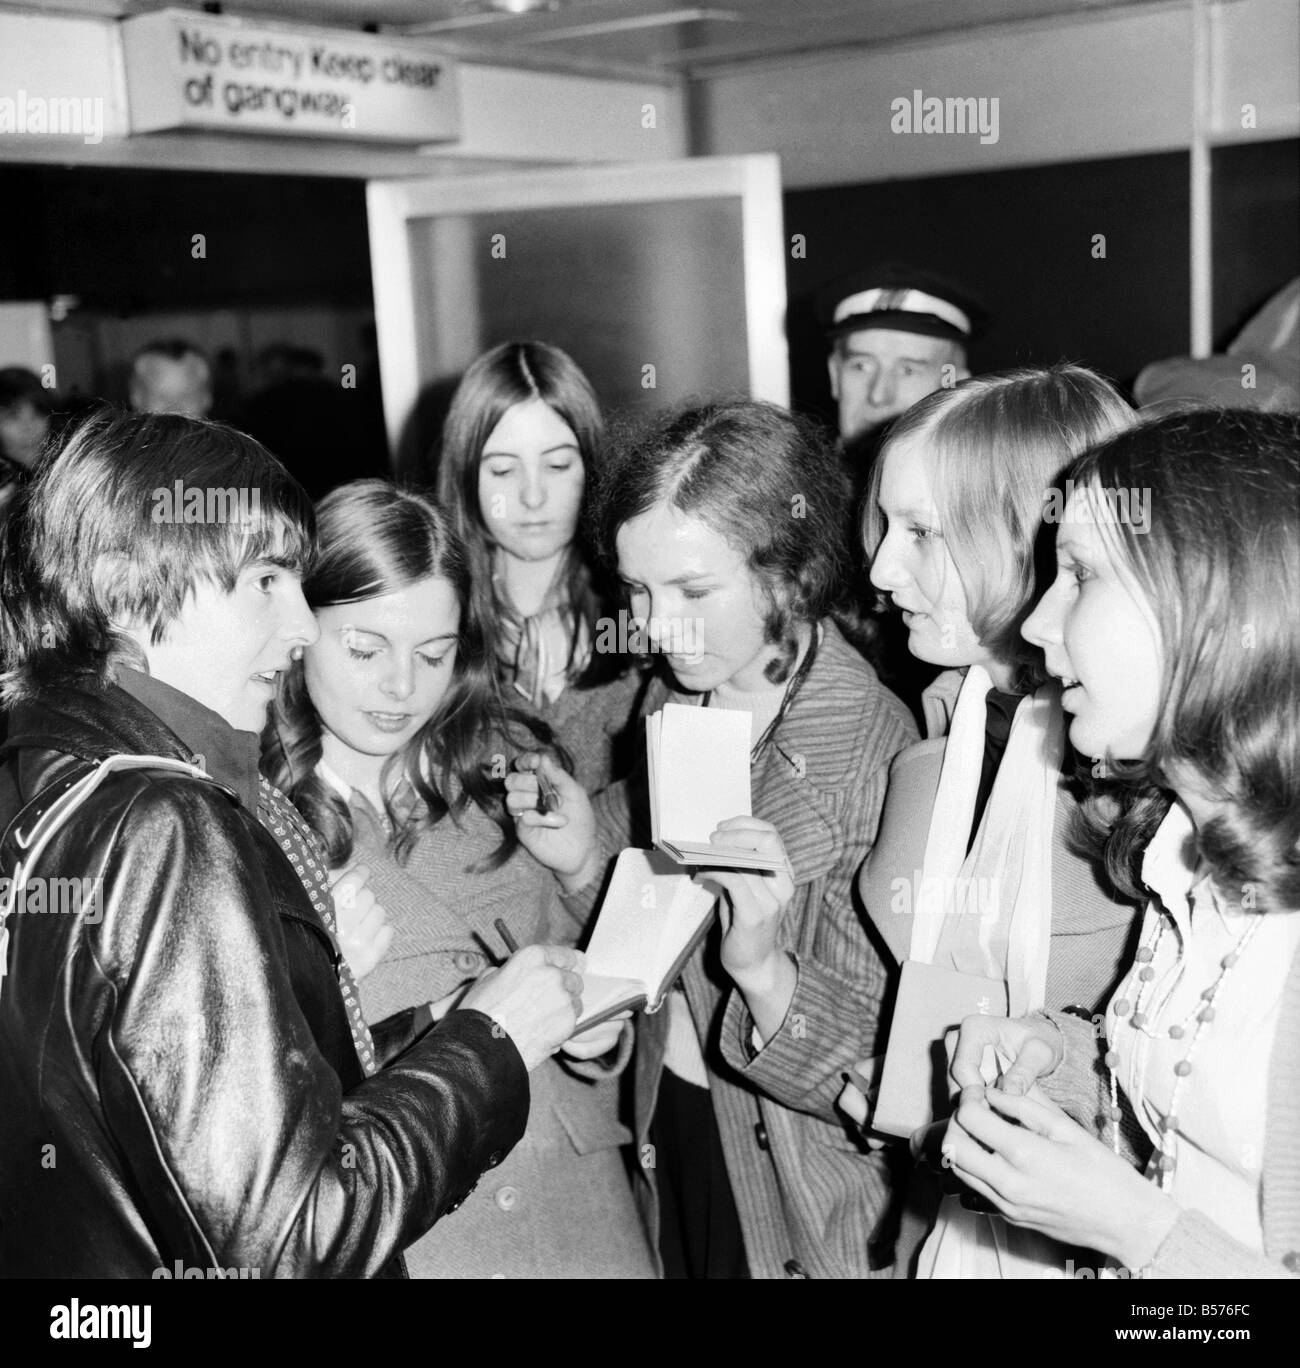 The Monkees: Monkee Davy Jones Arrived at Heathrow Airport with his ...